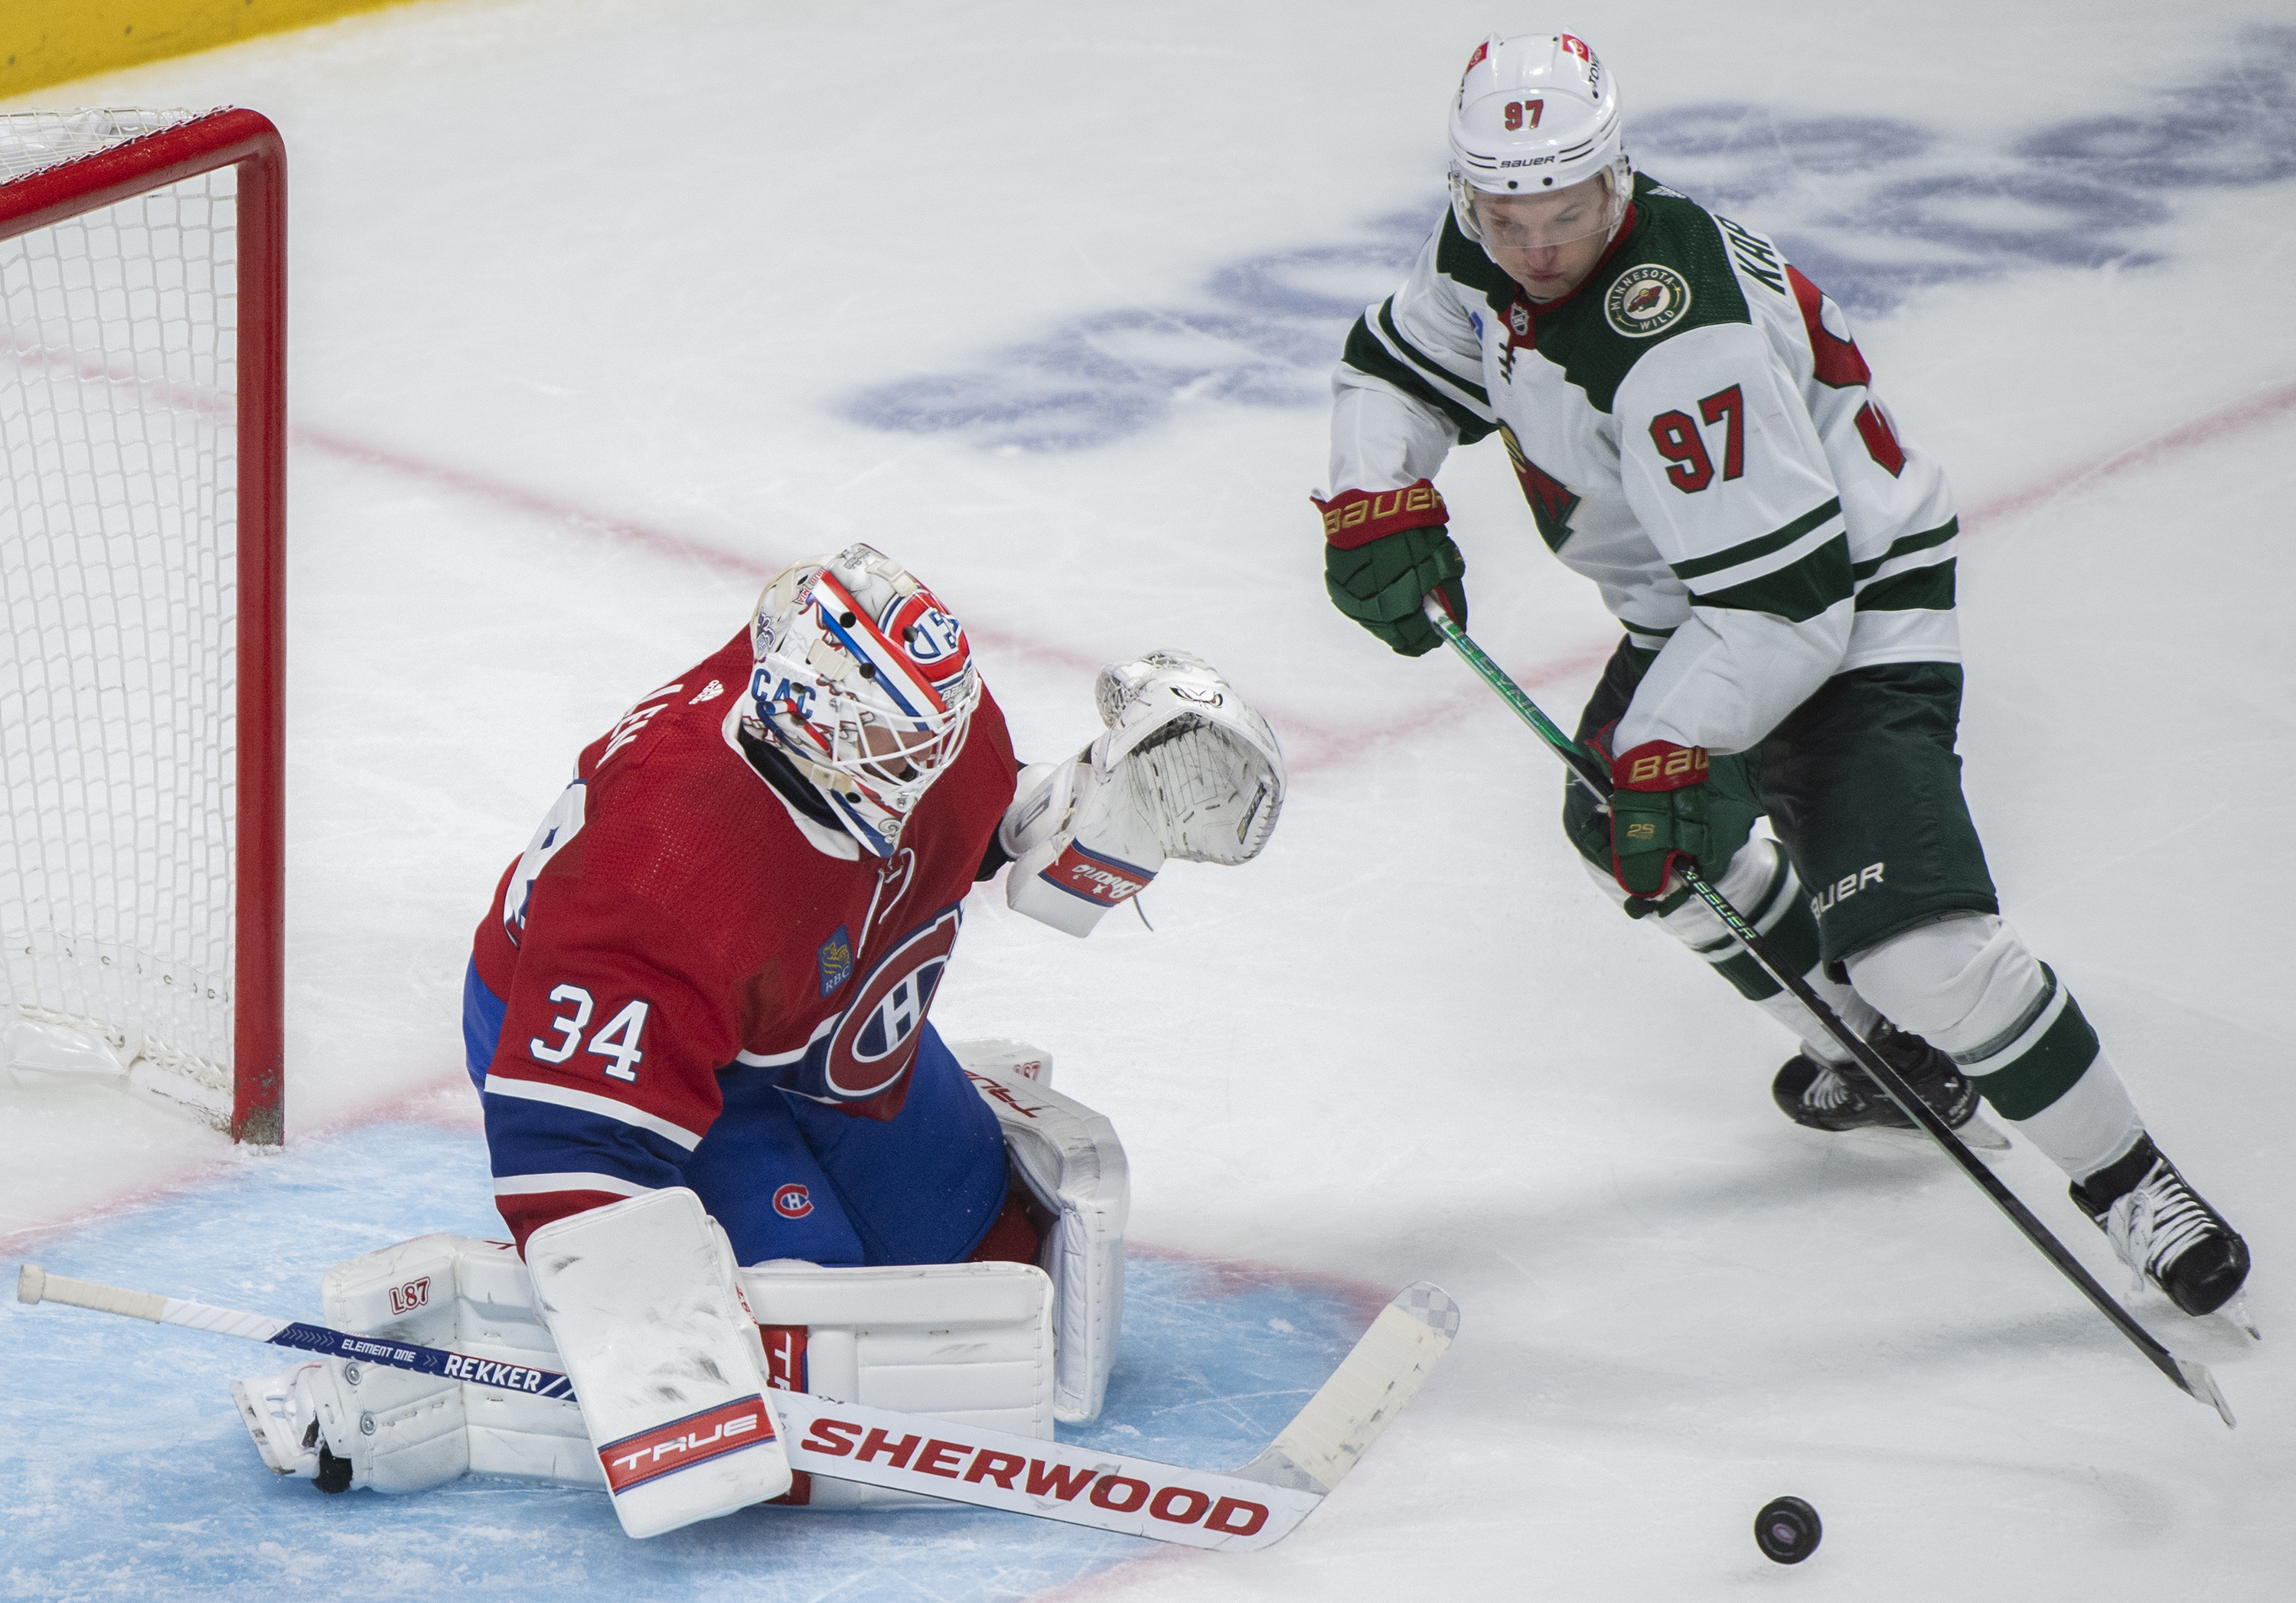 Call of the Wilde Montreal Canadiens fall to Minnesota Wild in 3-1 home-ice loss